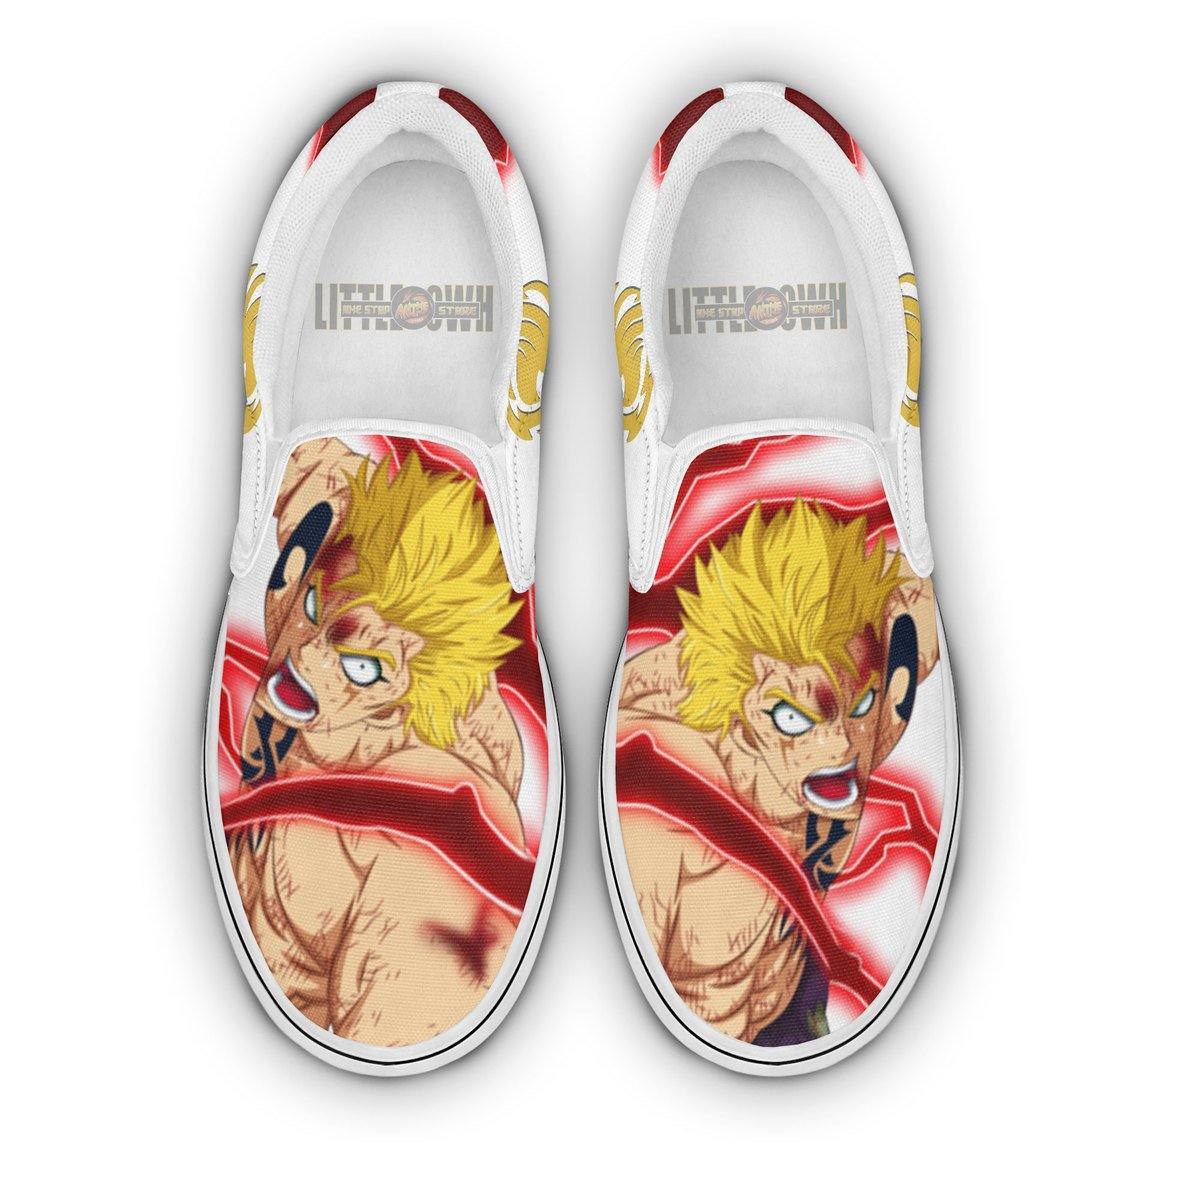 Fairy Tail Laxus Shoes Custom Anime Classic Slip-On Sneakers